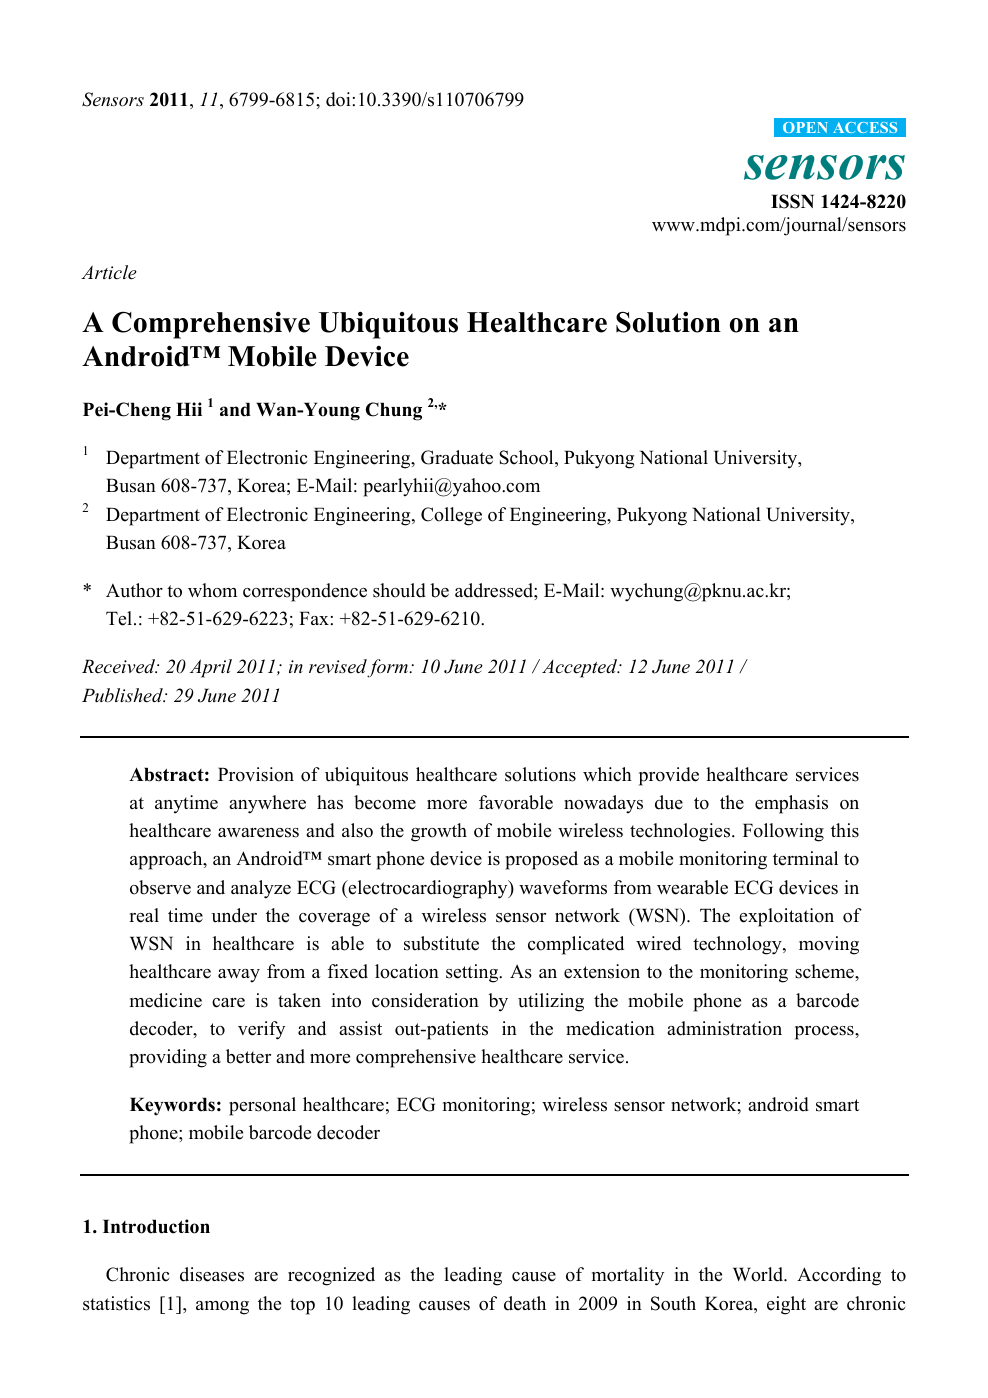 A Comprehensive Ubiquitous Healthcare Solution On An Android Mobile Device Topic Of Research Paper In Medical Engineering Download Scholarly Article Pdf And Read For Free On Cyberleninka Open Science Hub